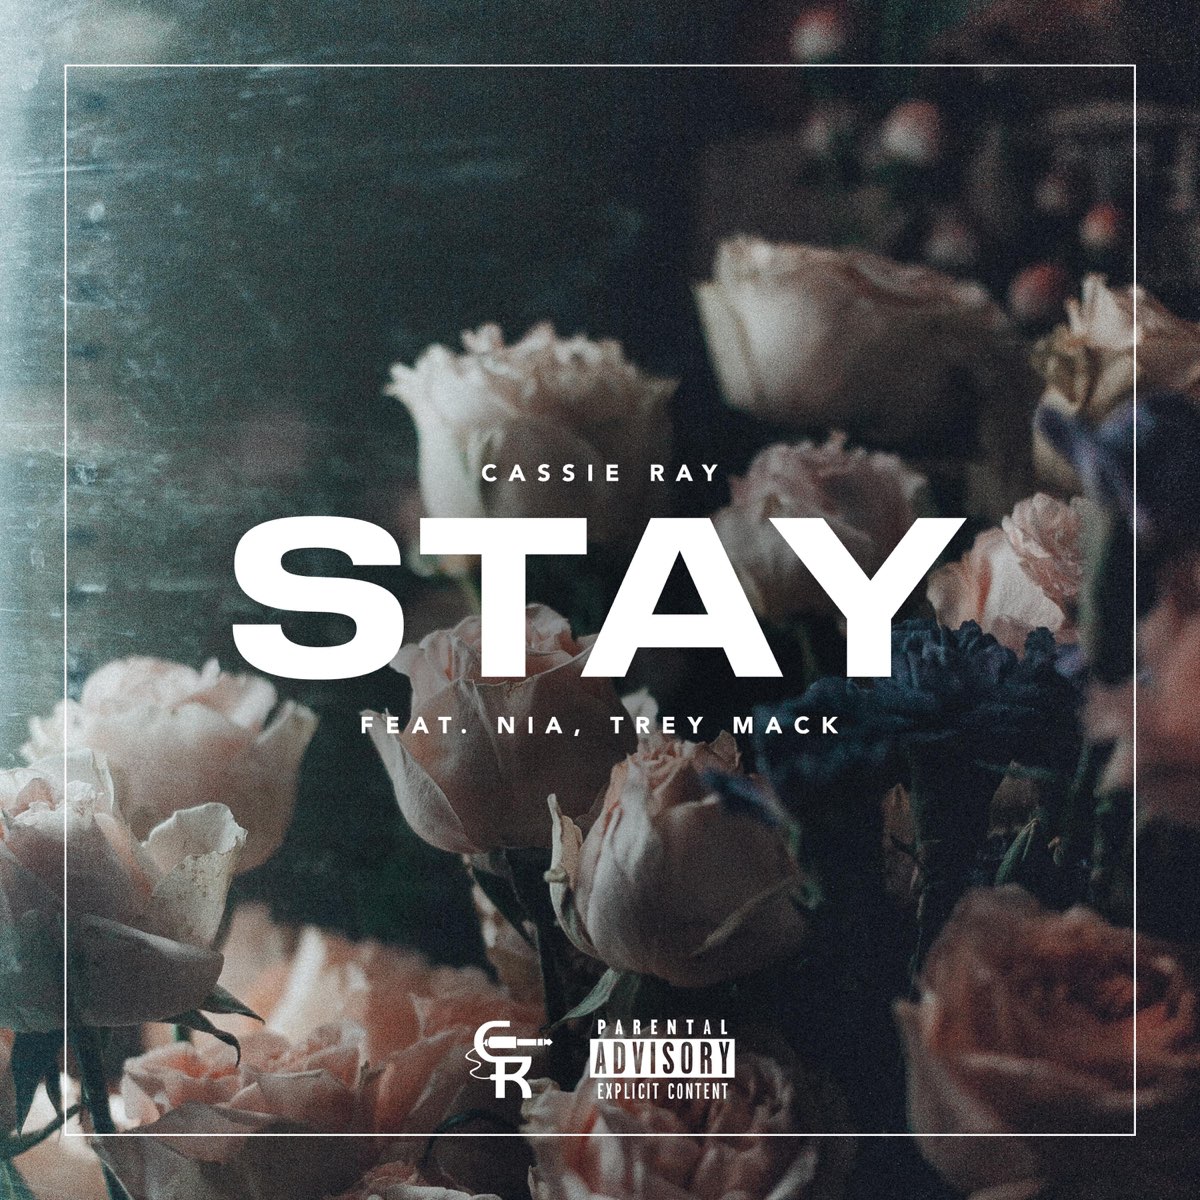 Cassie ray. Stay with me (feat. Tom the Gaffer).